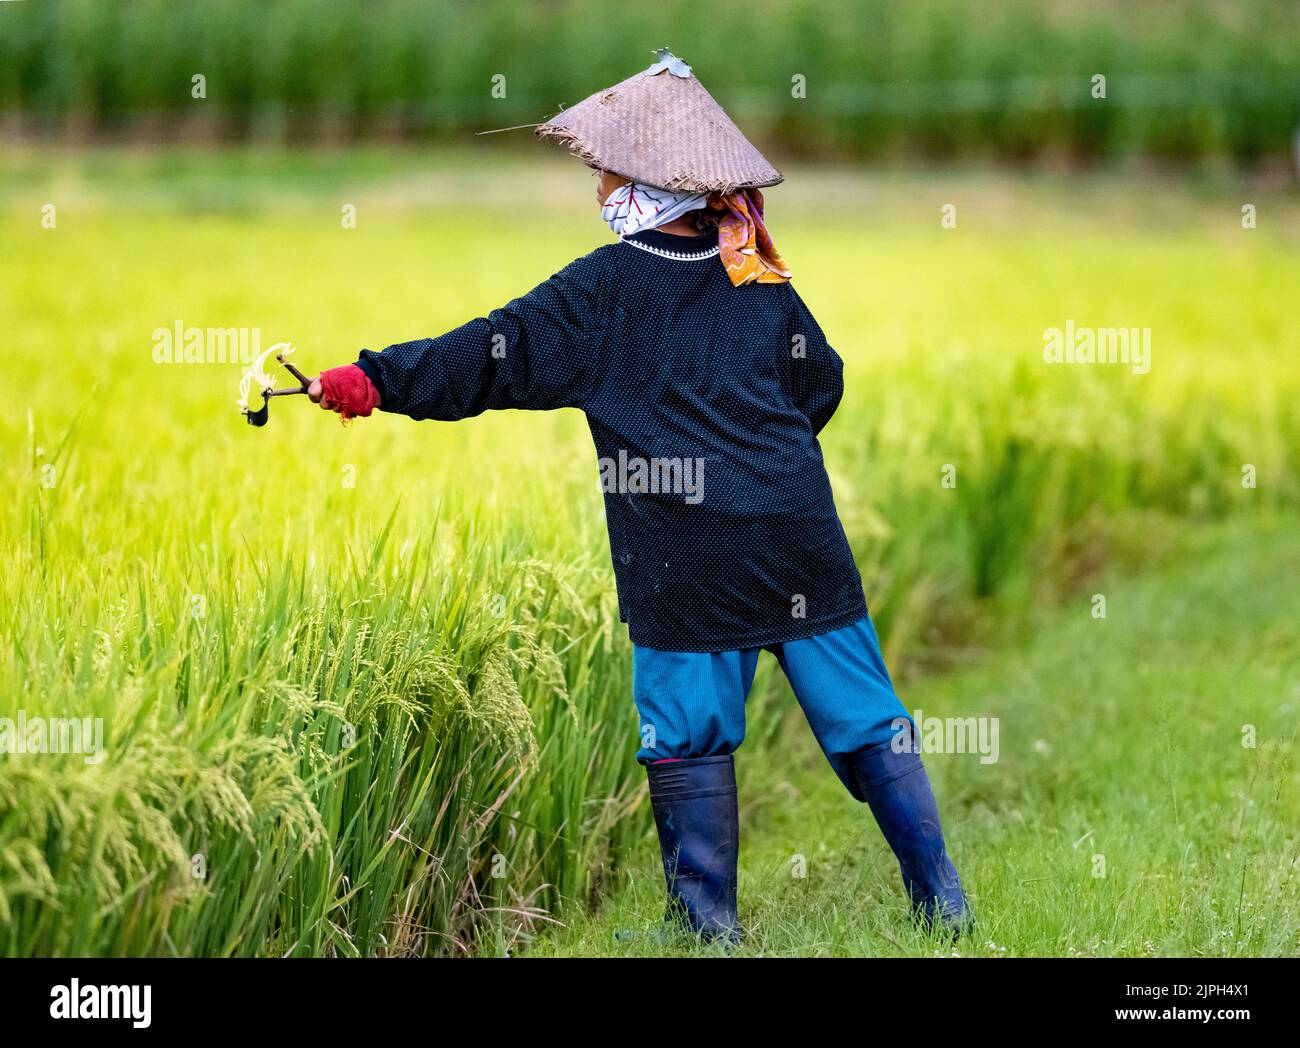 An Indonesia woman using sling shot to drive away birds in rice field. Sulawesi, Indonesia. Stock Photo